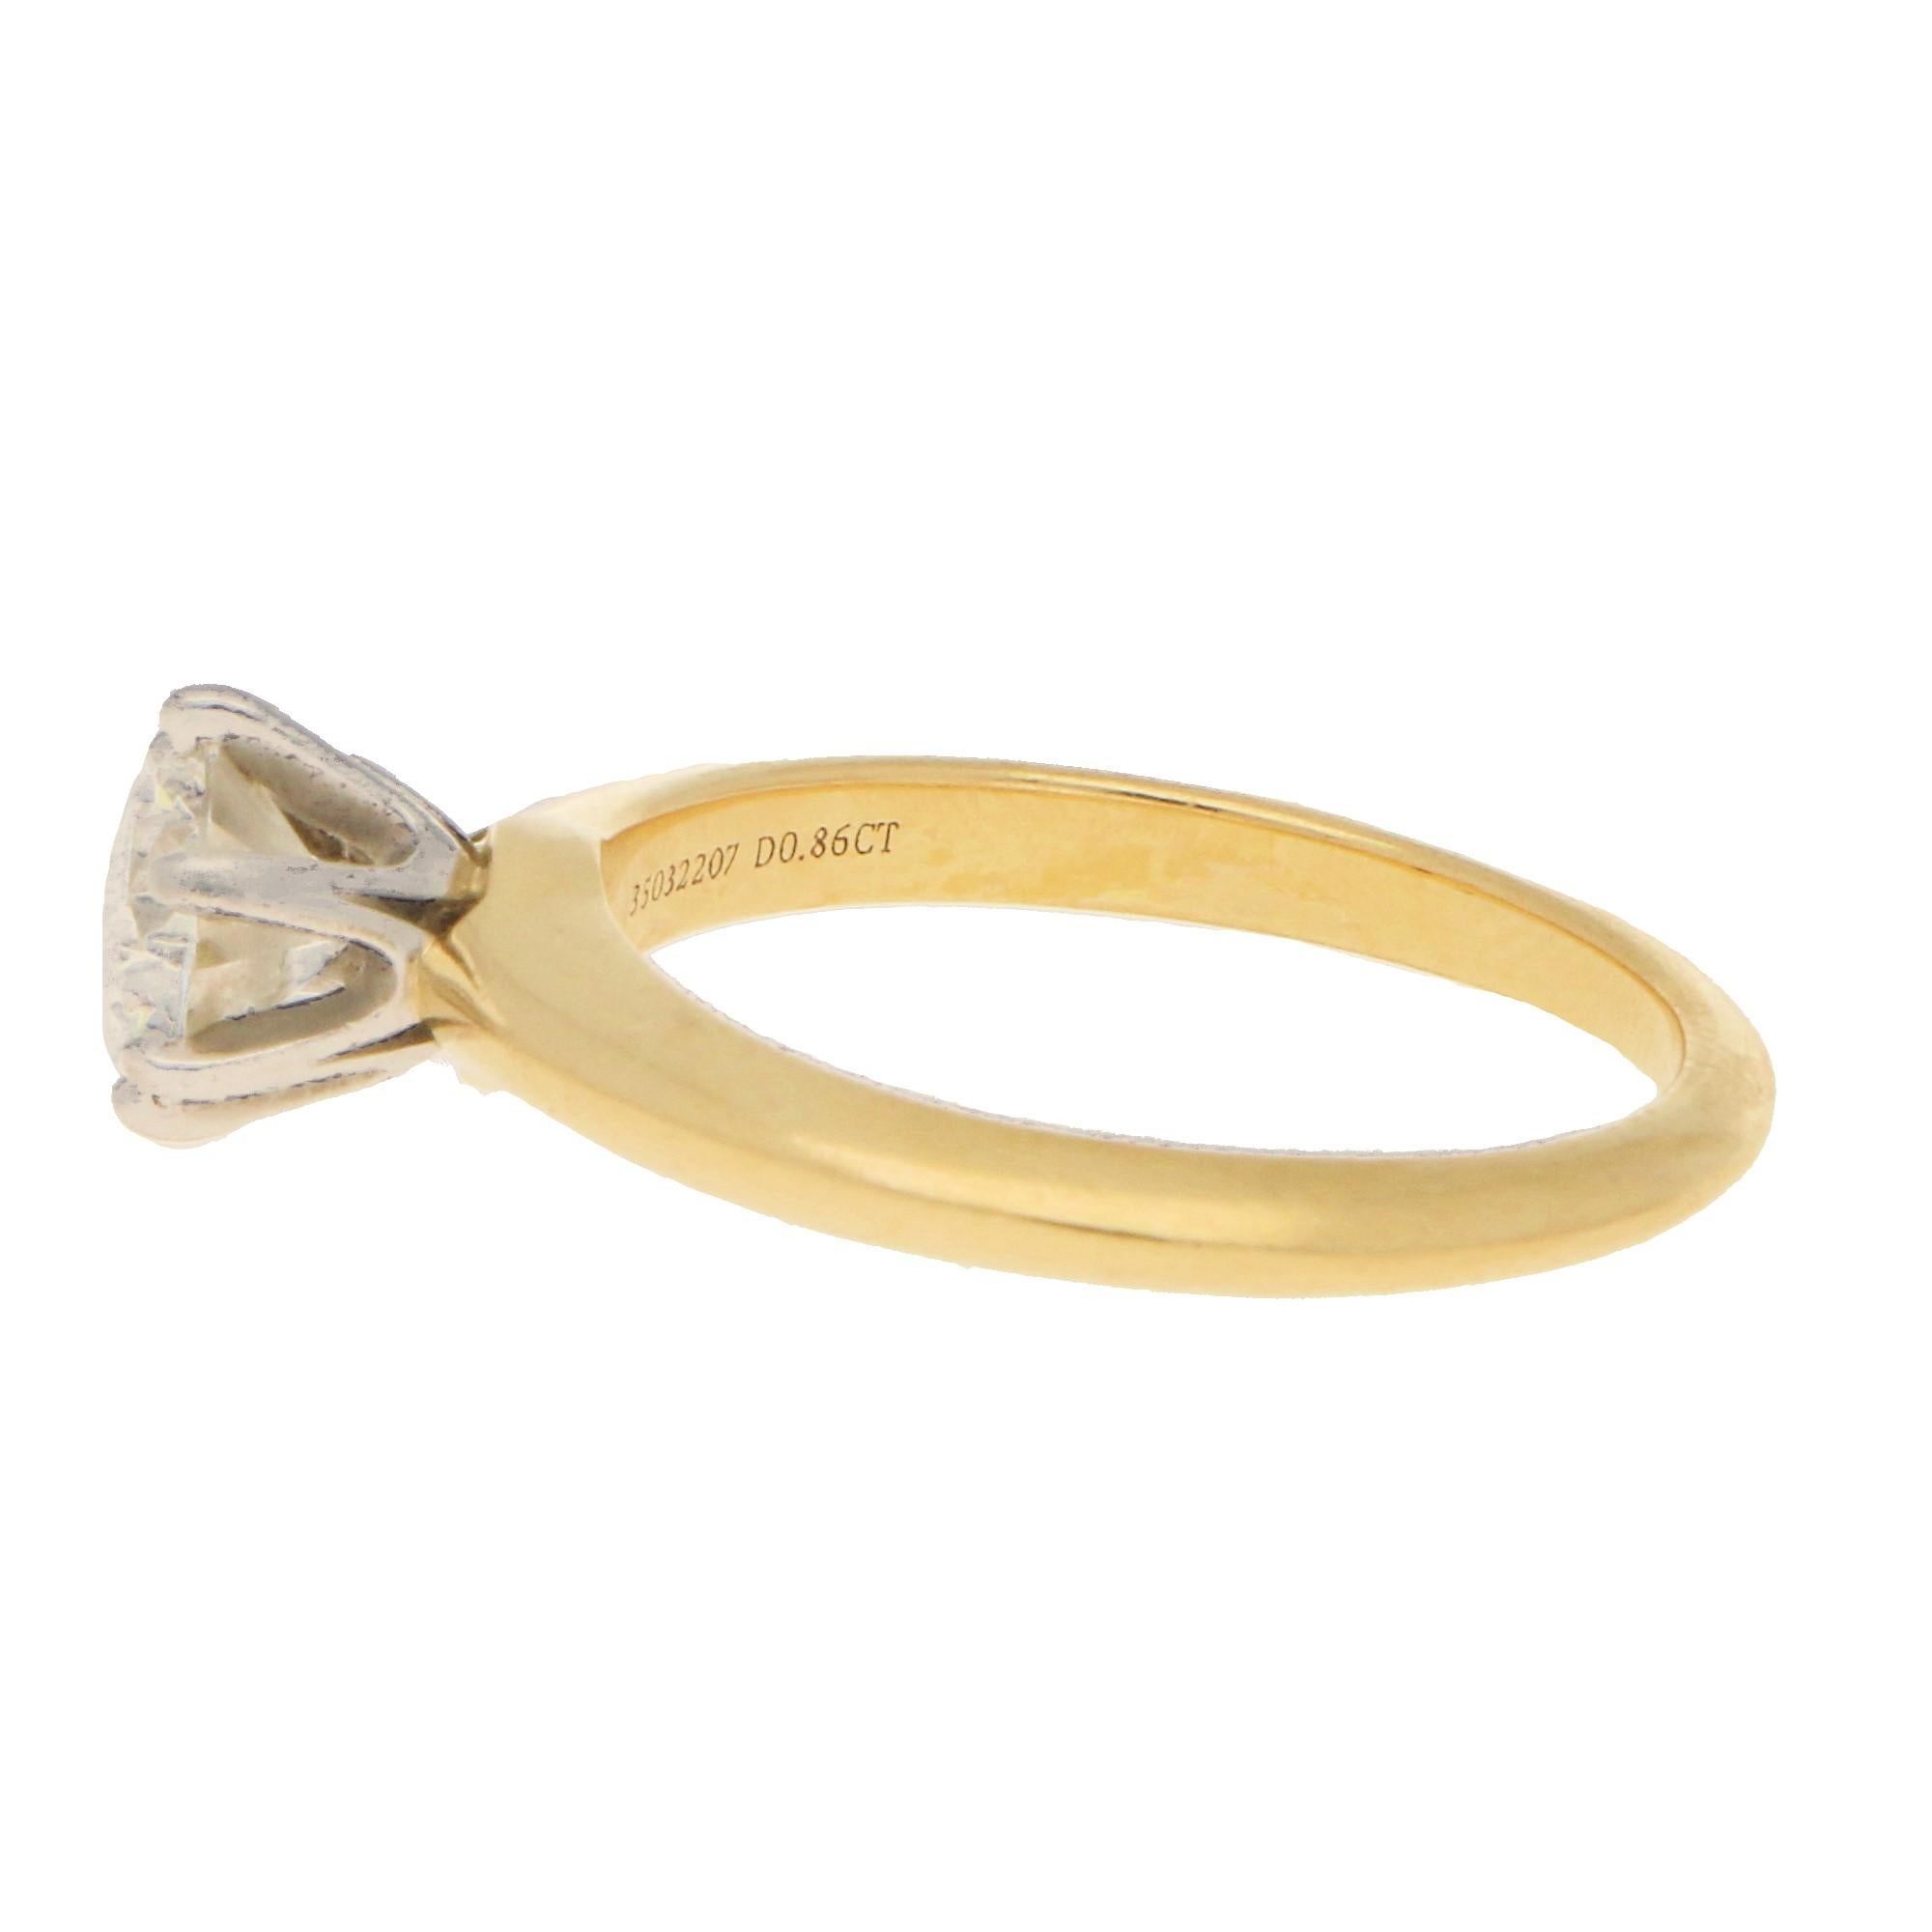 Round Cut Tiffany & Co Solitaire Diamond Ring in 18ct Yellow Gold 0.86 Carat